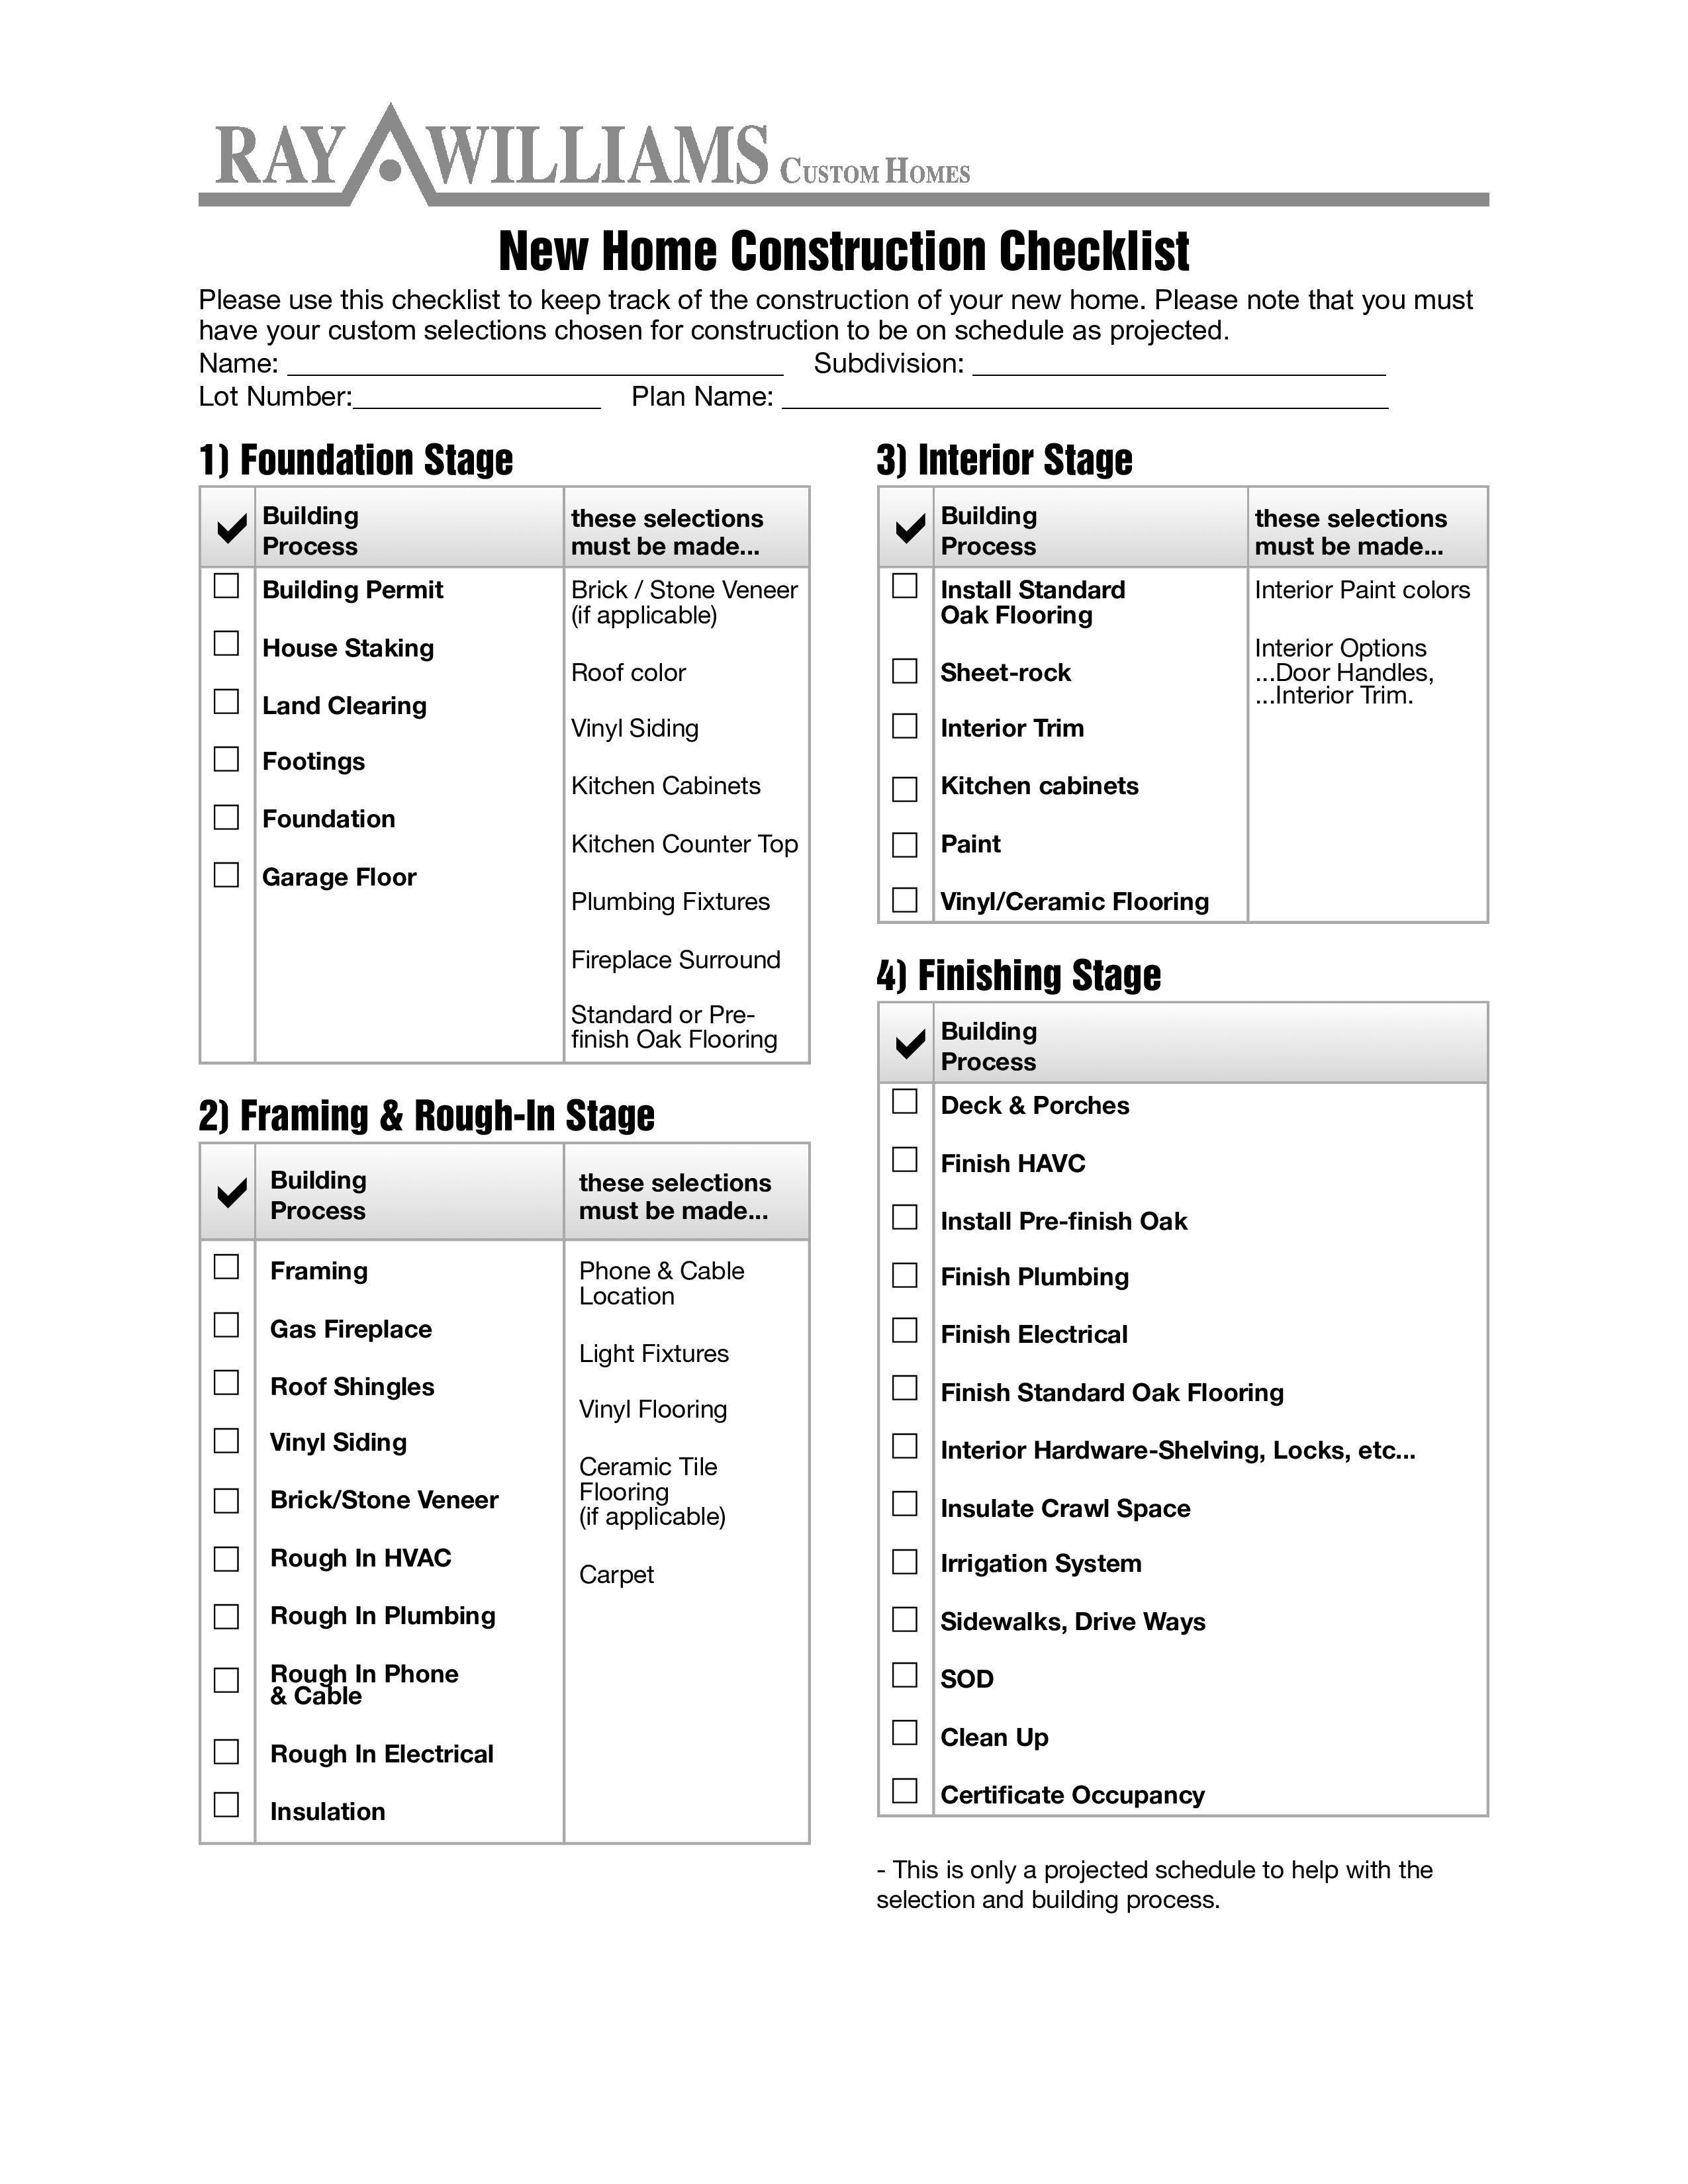 Home Construction Checklist Templates at